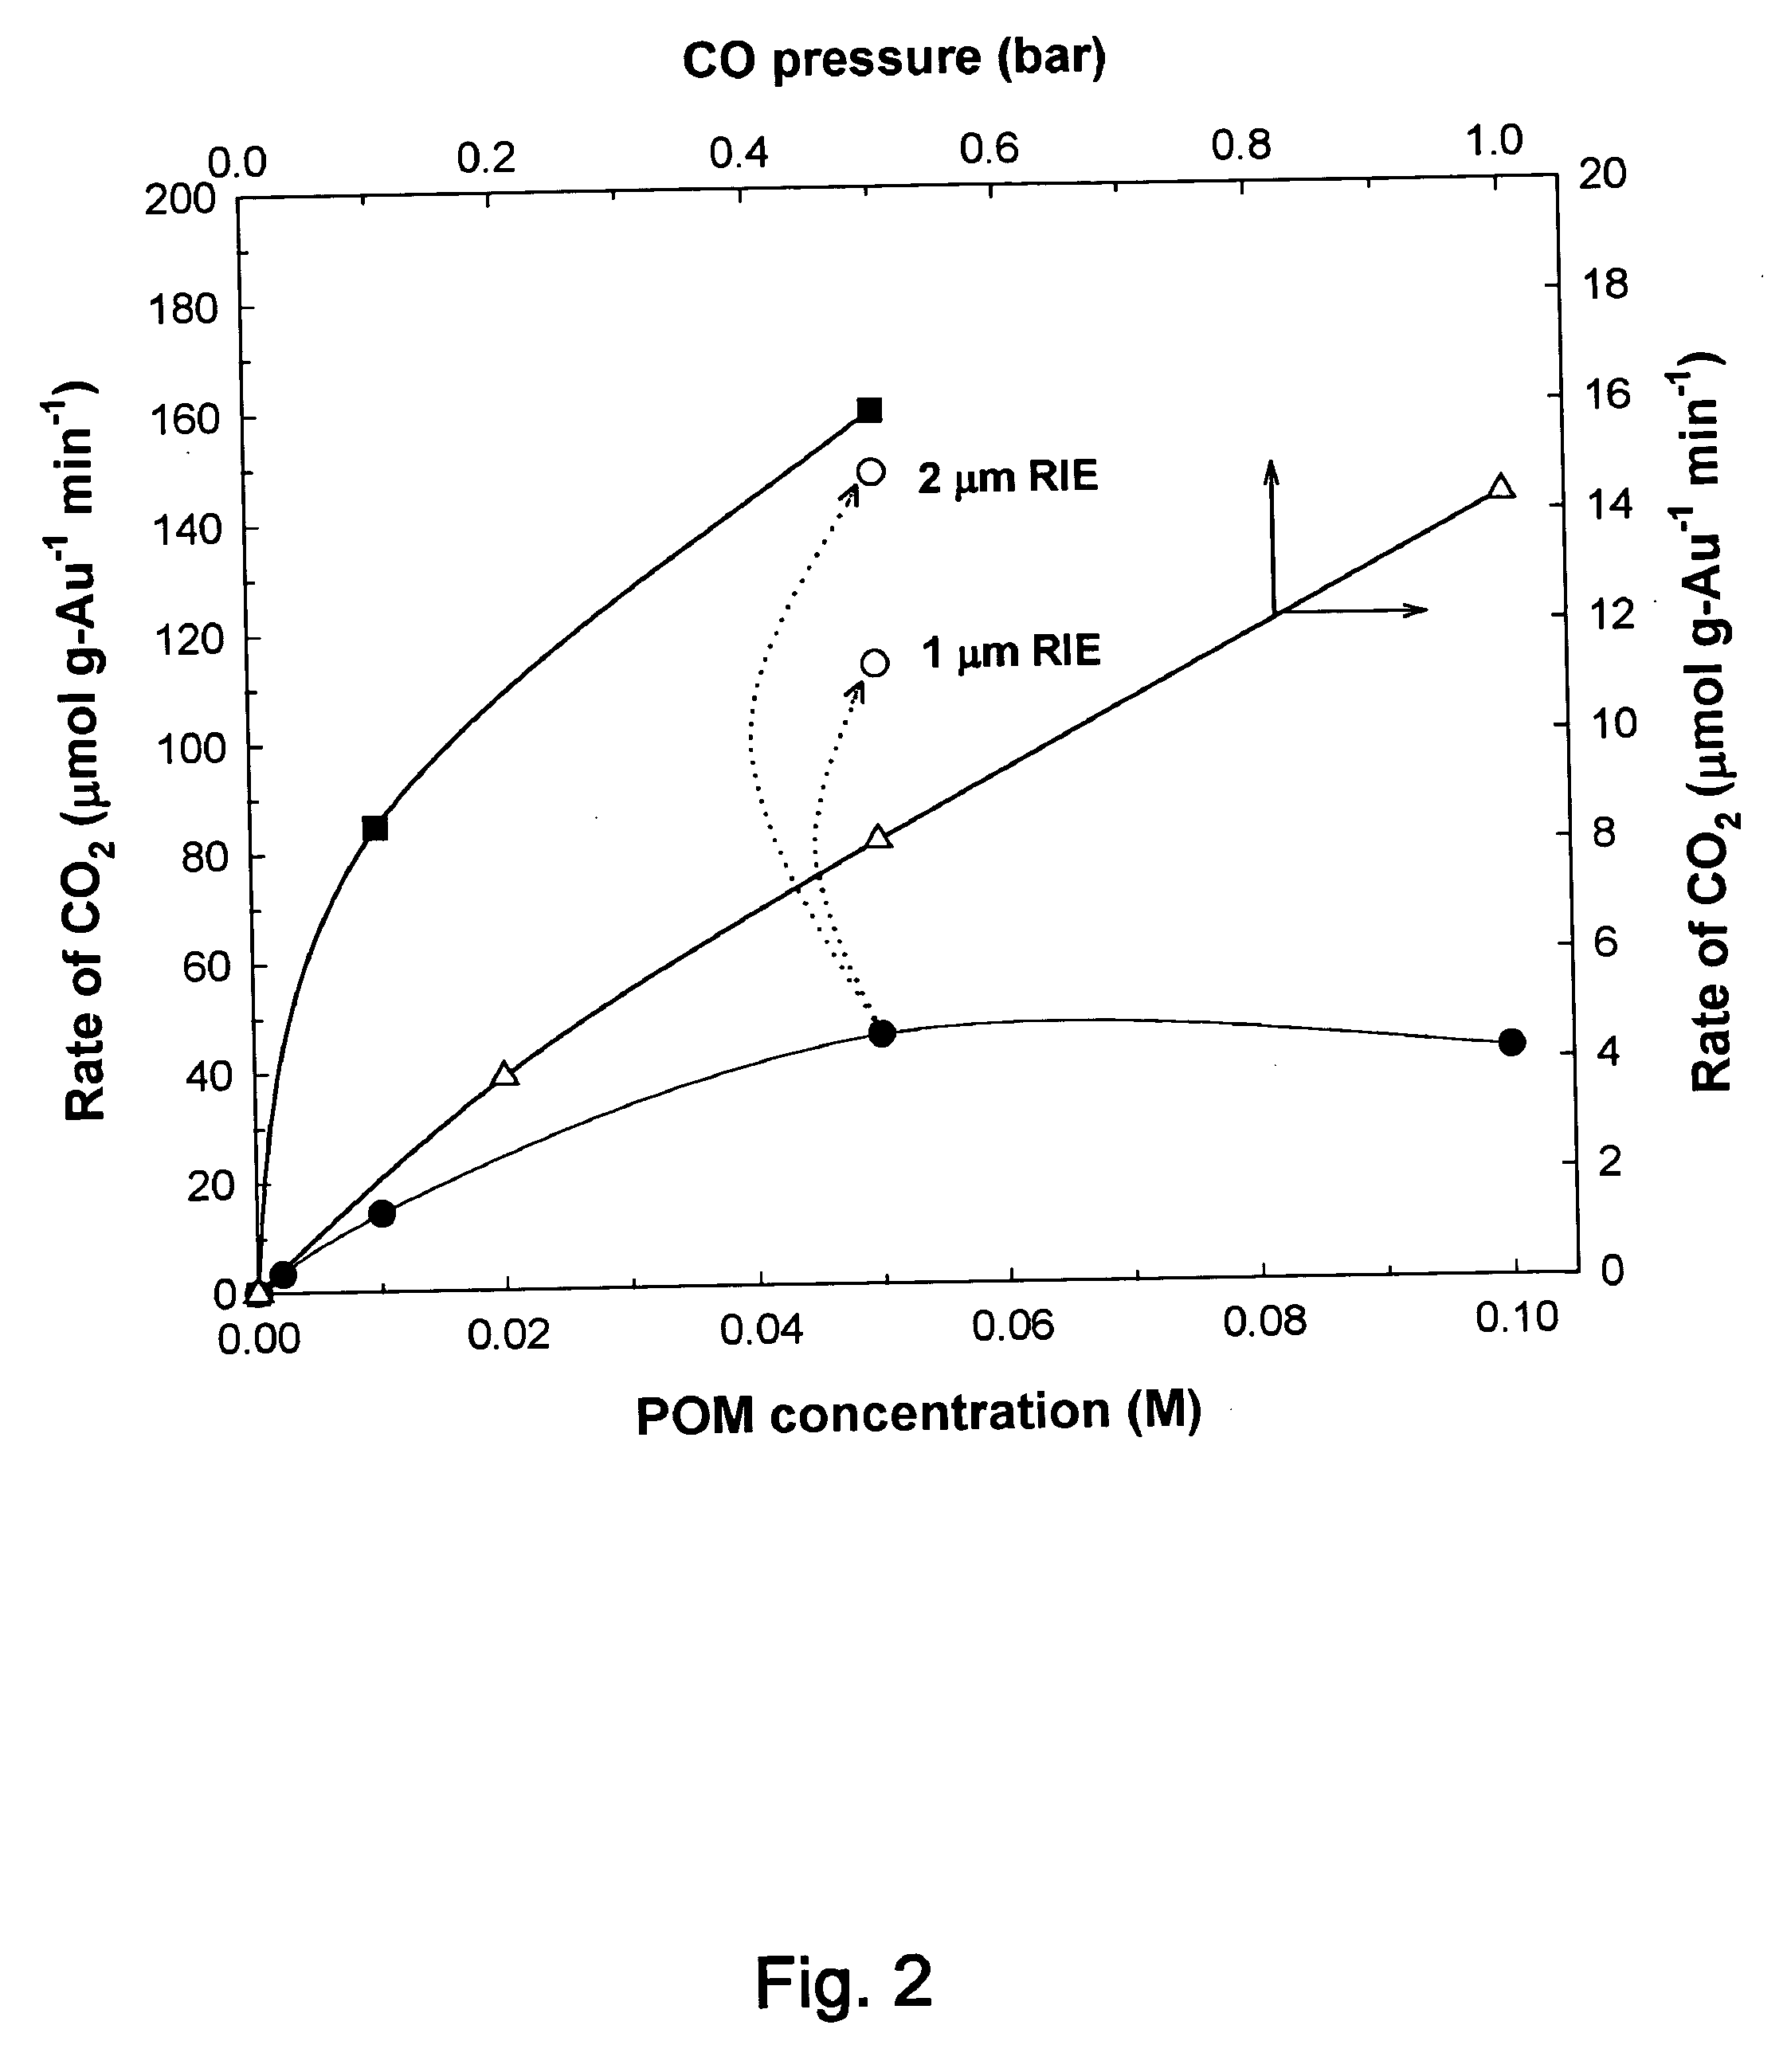 Catalytic method to remove CO and utilize its energy content in CO-containing streams